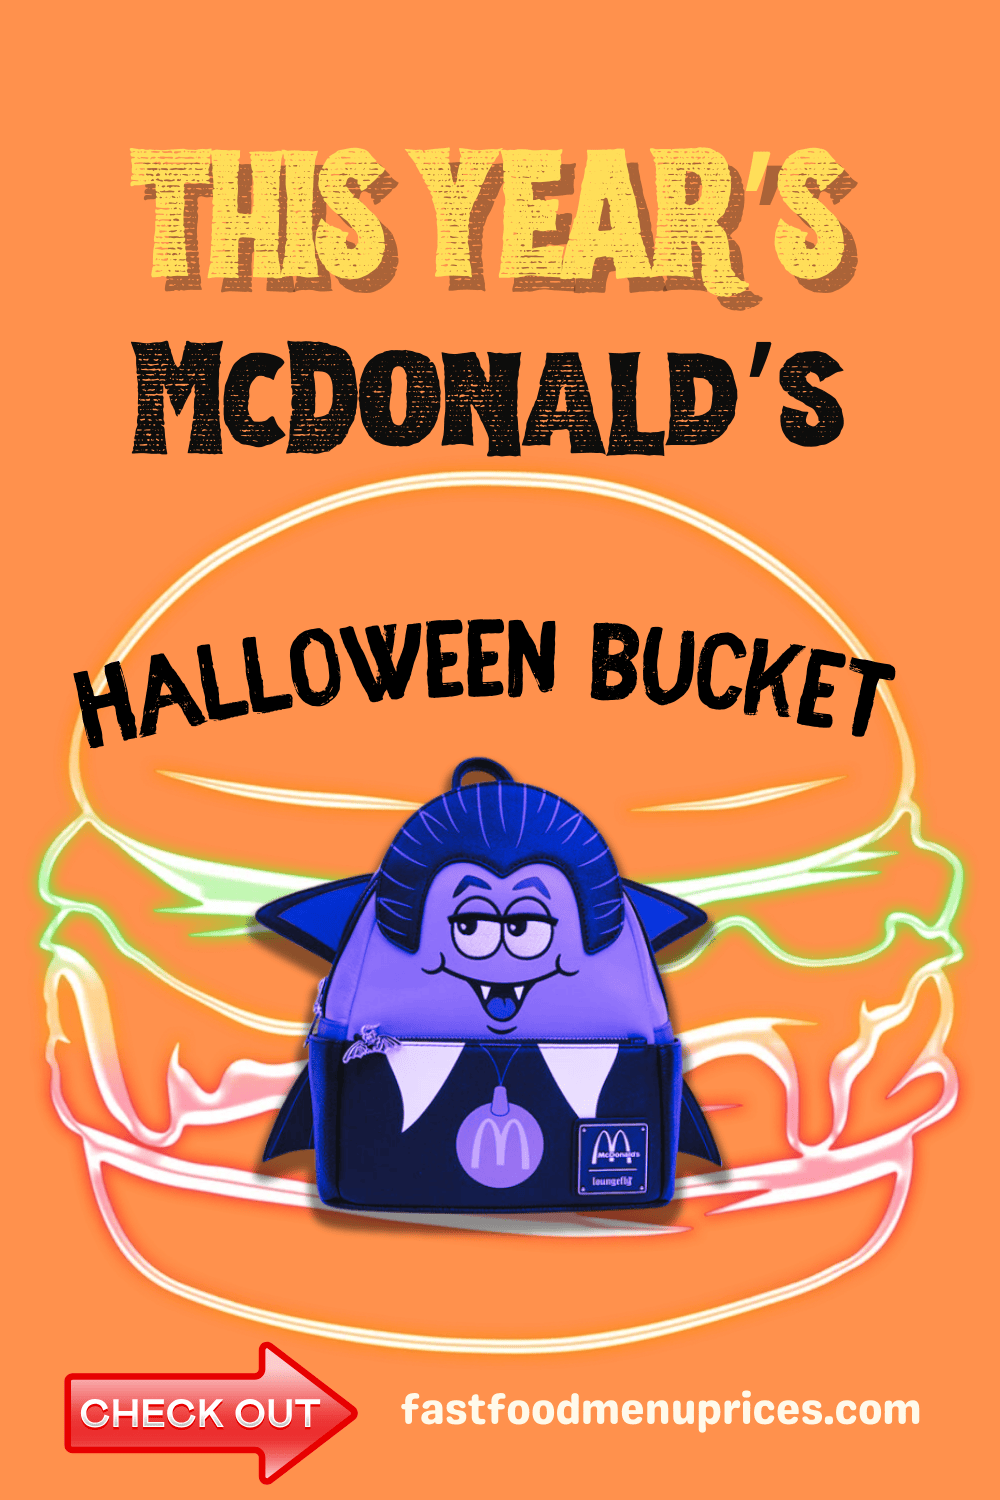 Discover the mysteriously fun and limited edition McDonald's Halloween bucket, perfect for collecting treats!